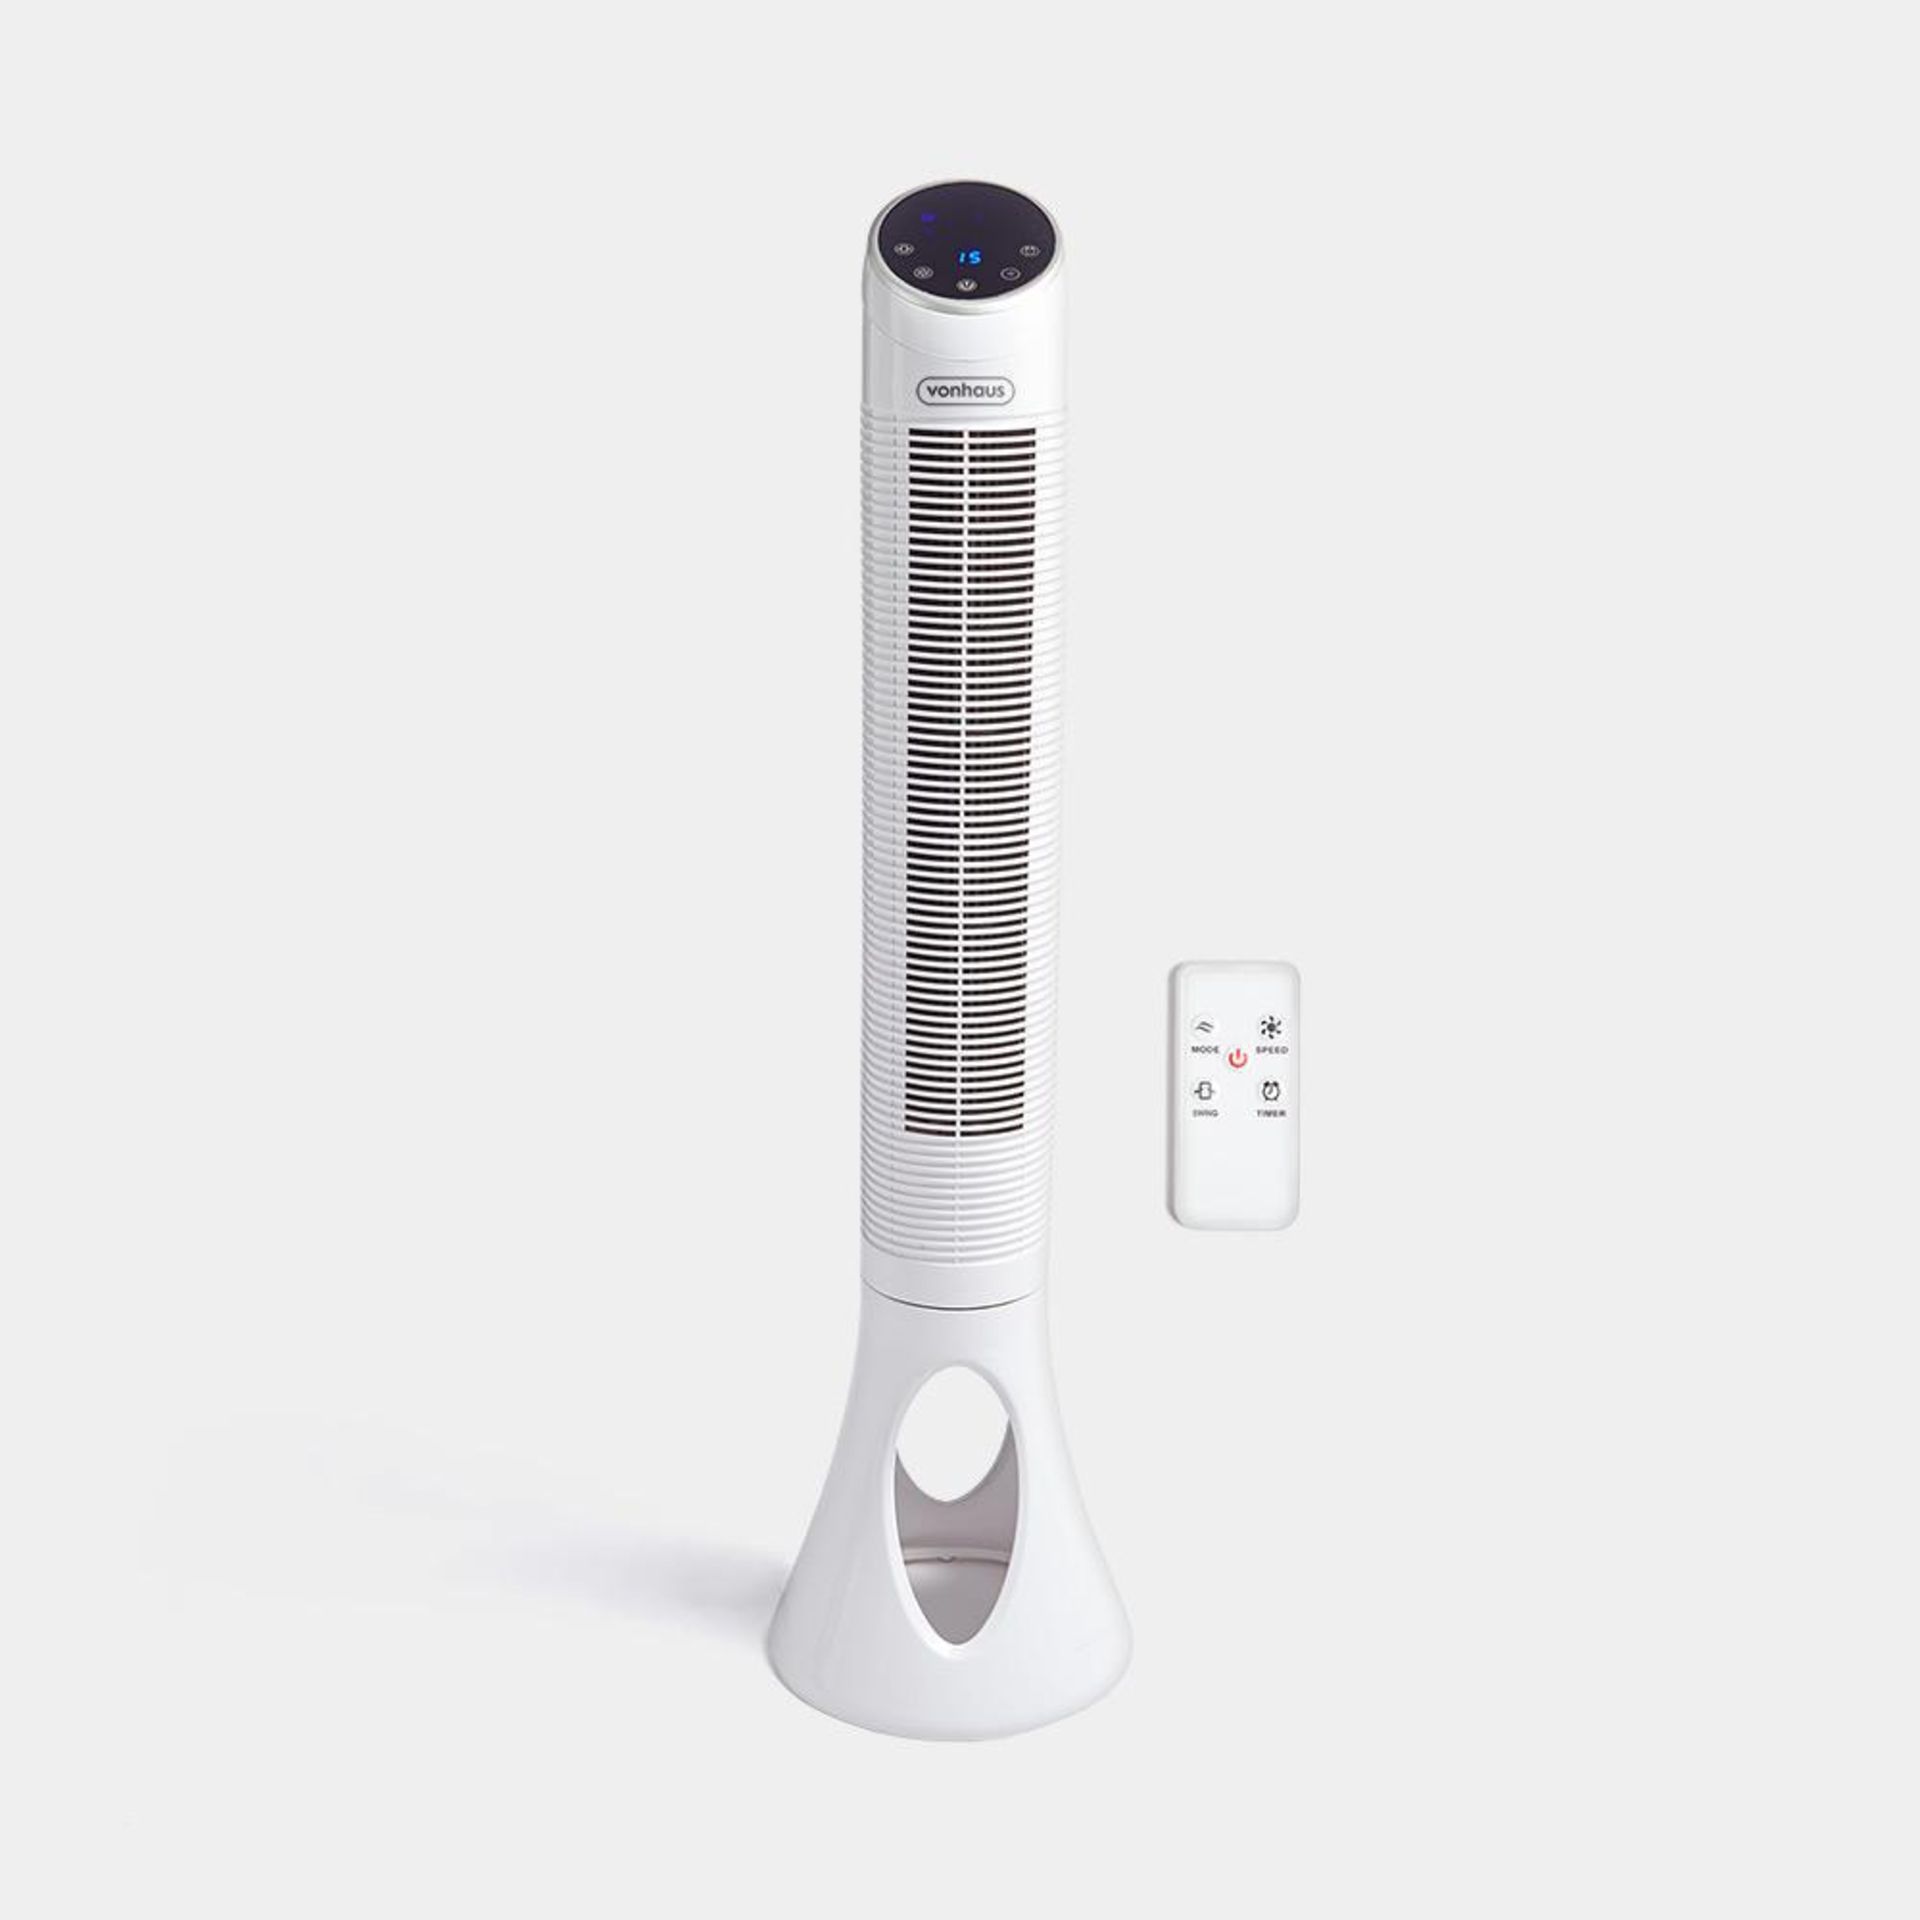 40" Tower FanTower FanChill out with this sleek tower fan. Ideal for home offices, this 40â€ fan